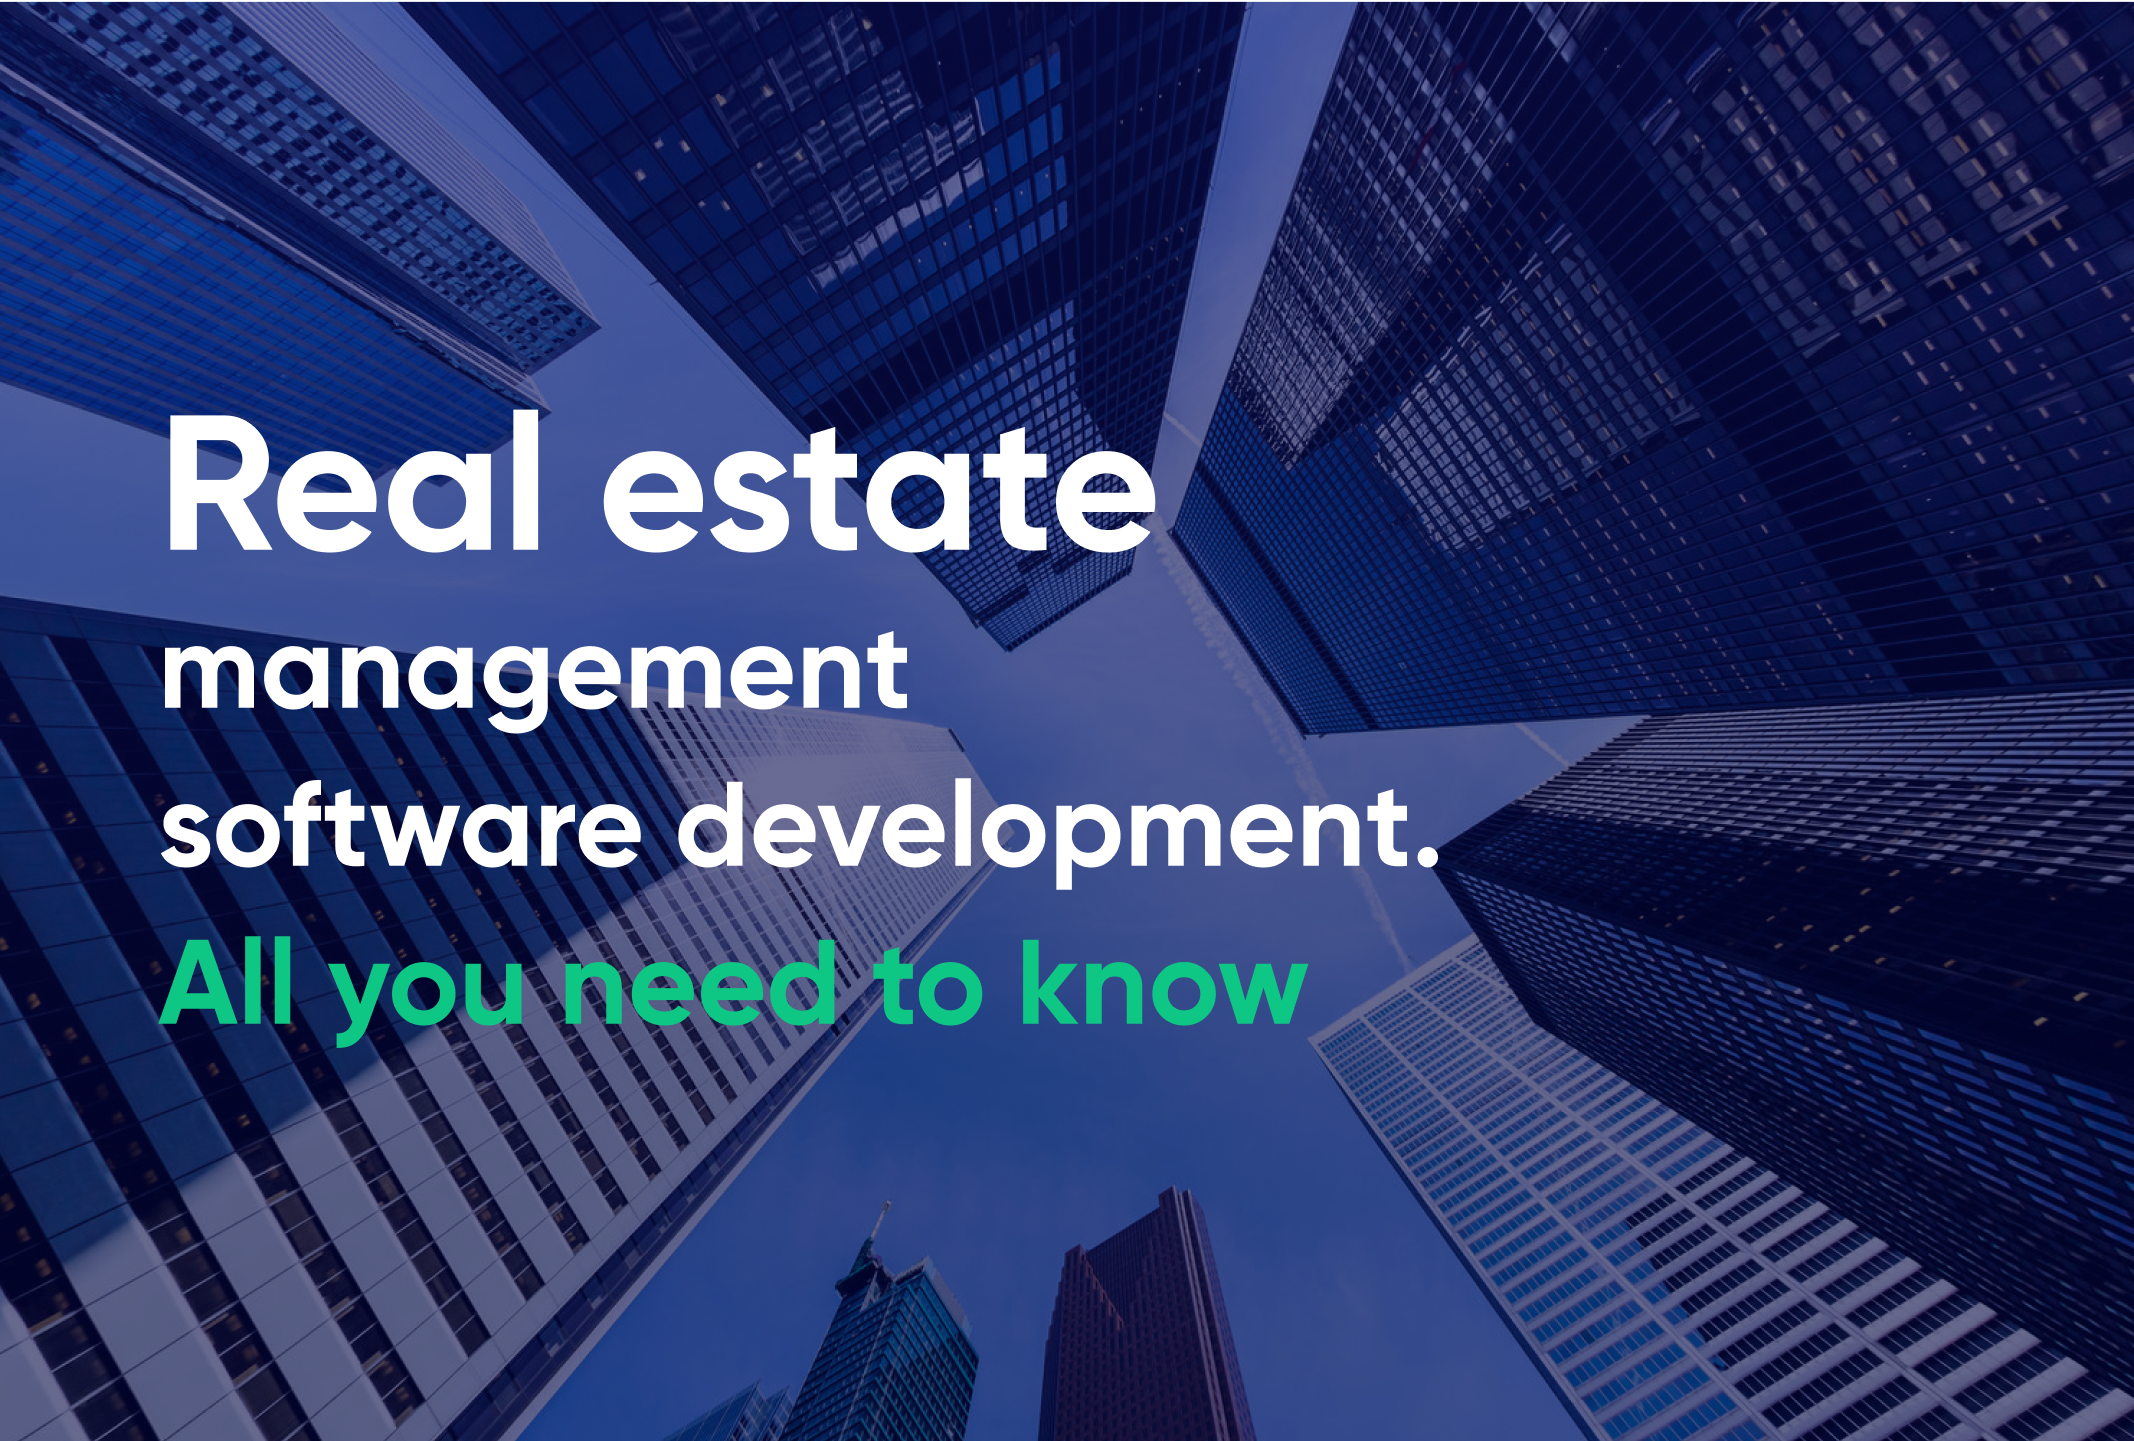 Real estate management software development All you need to know